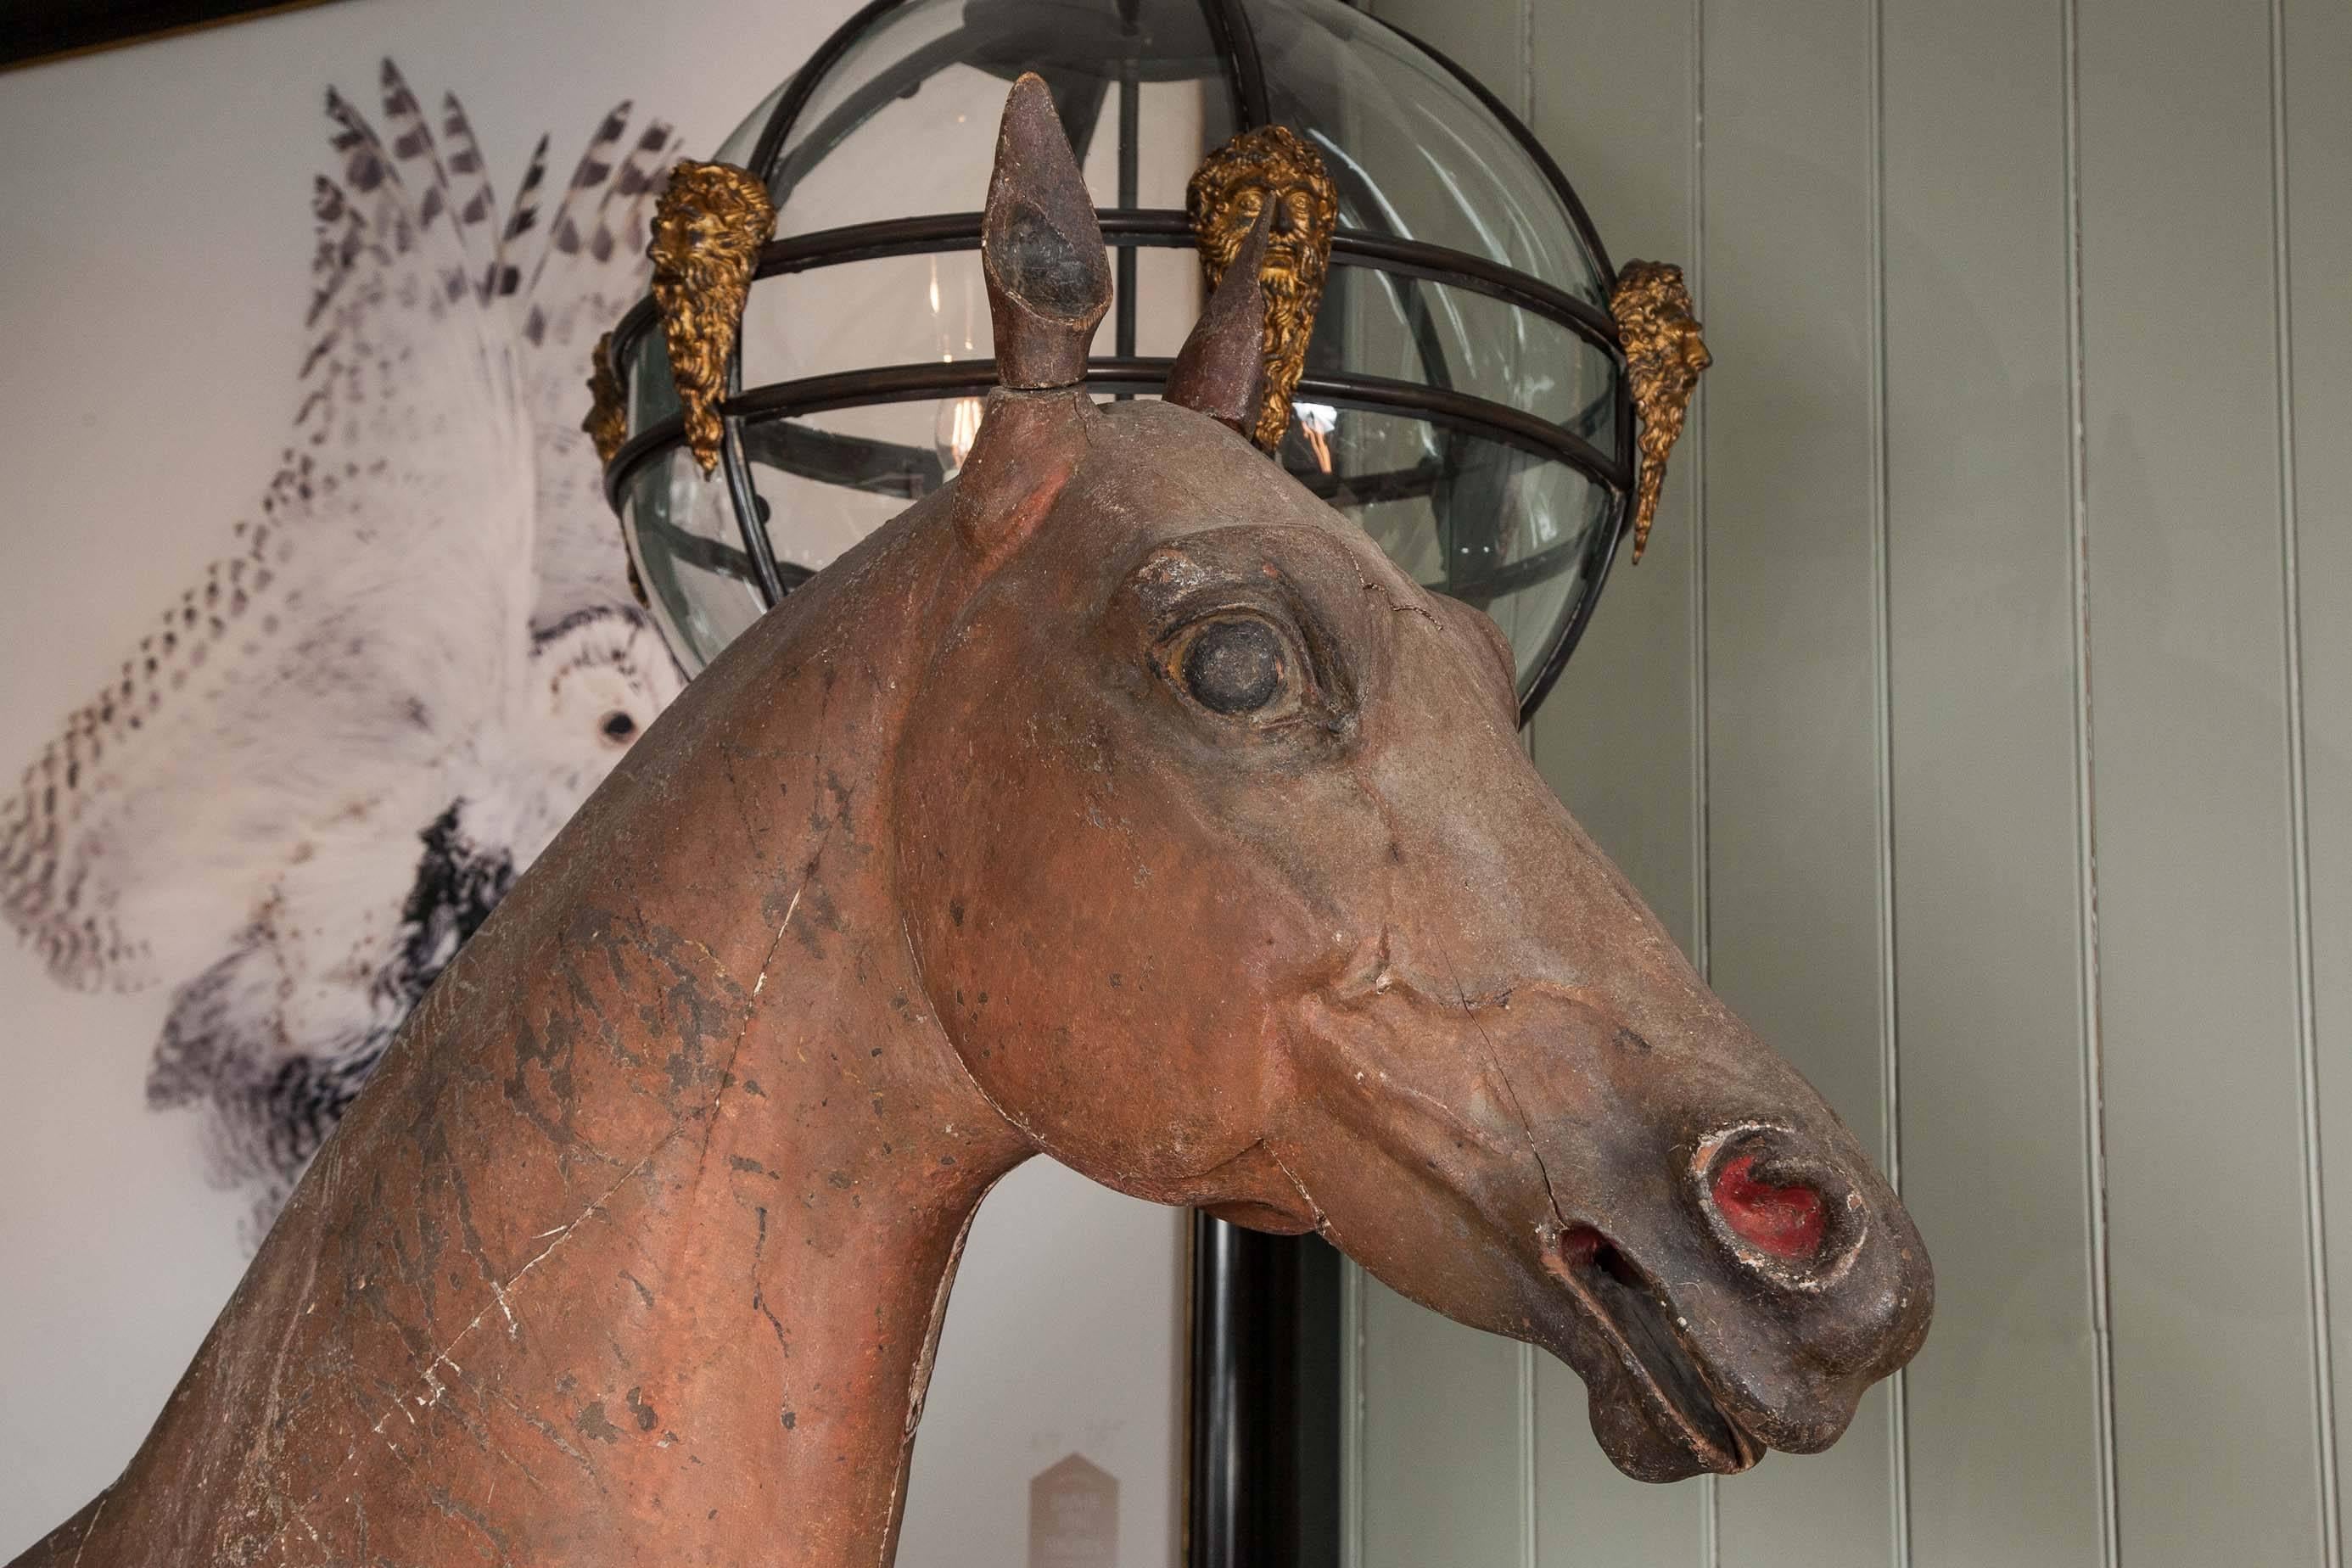 Georgian Late 18th-Early 19th Century, Full Size Wooden Sculpture of a Horse For Sale